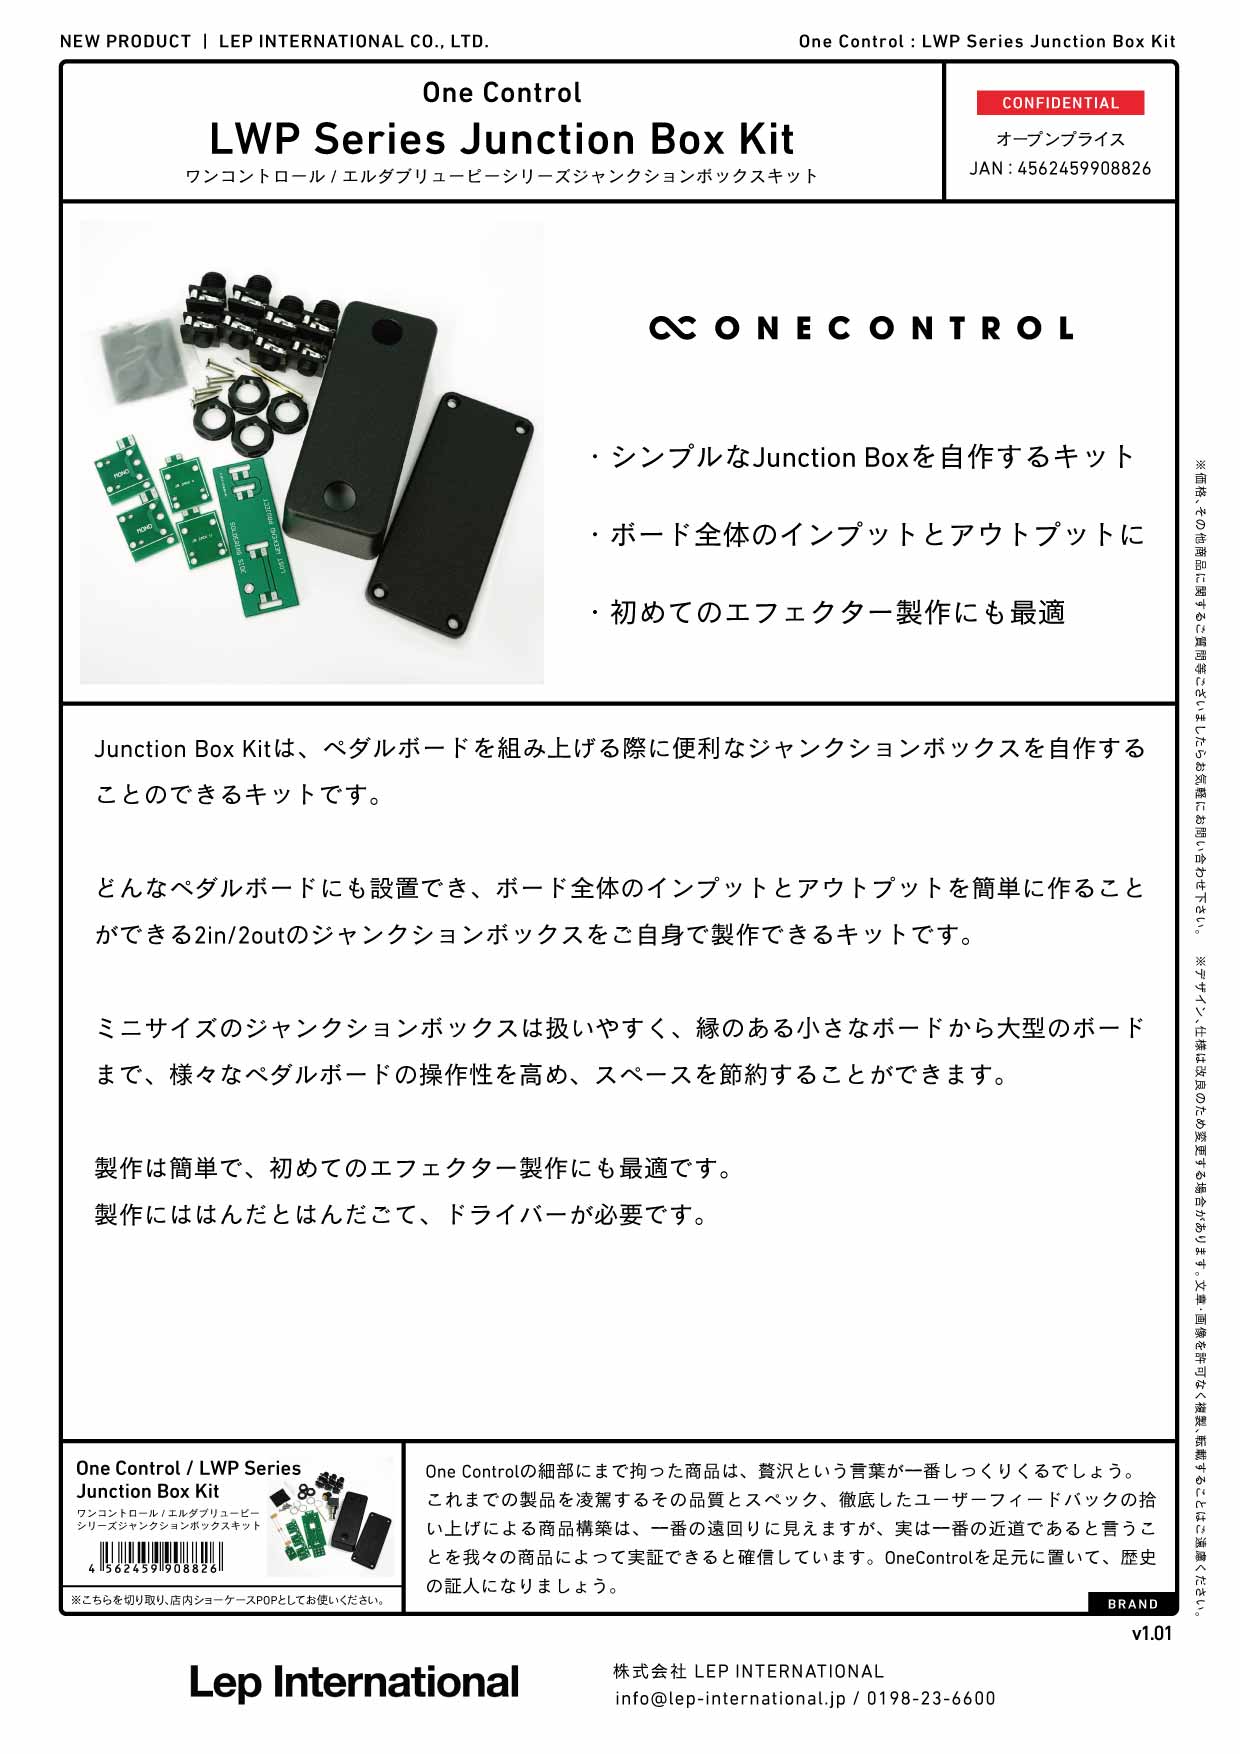 One Control / LWP Series Junction Box Kit